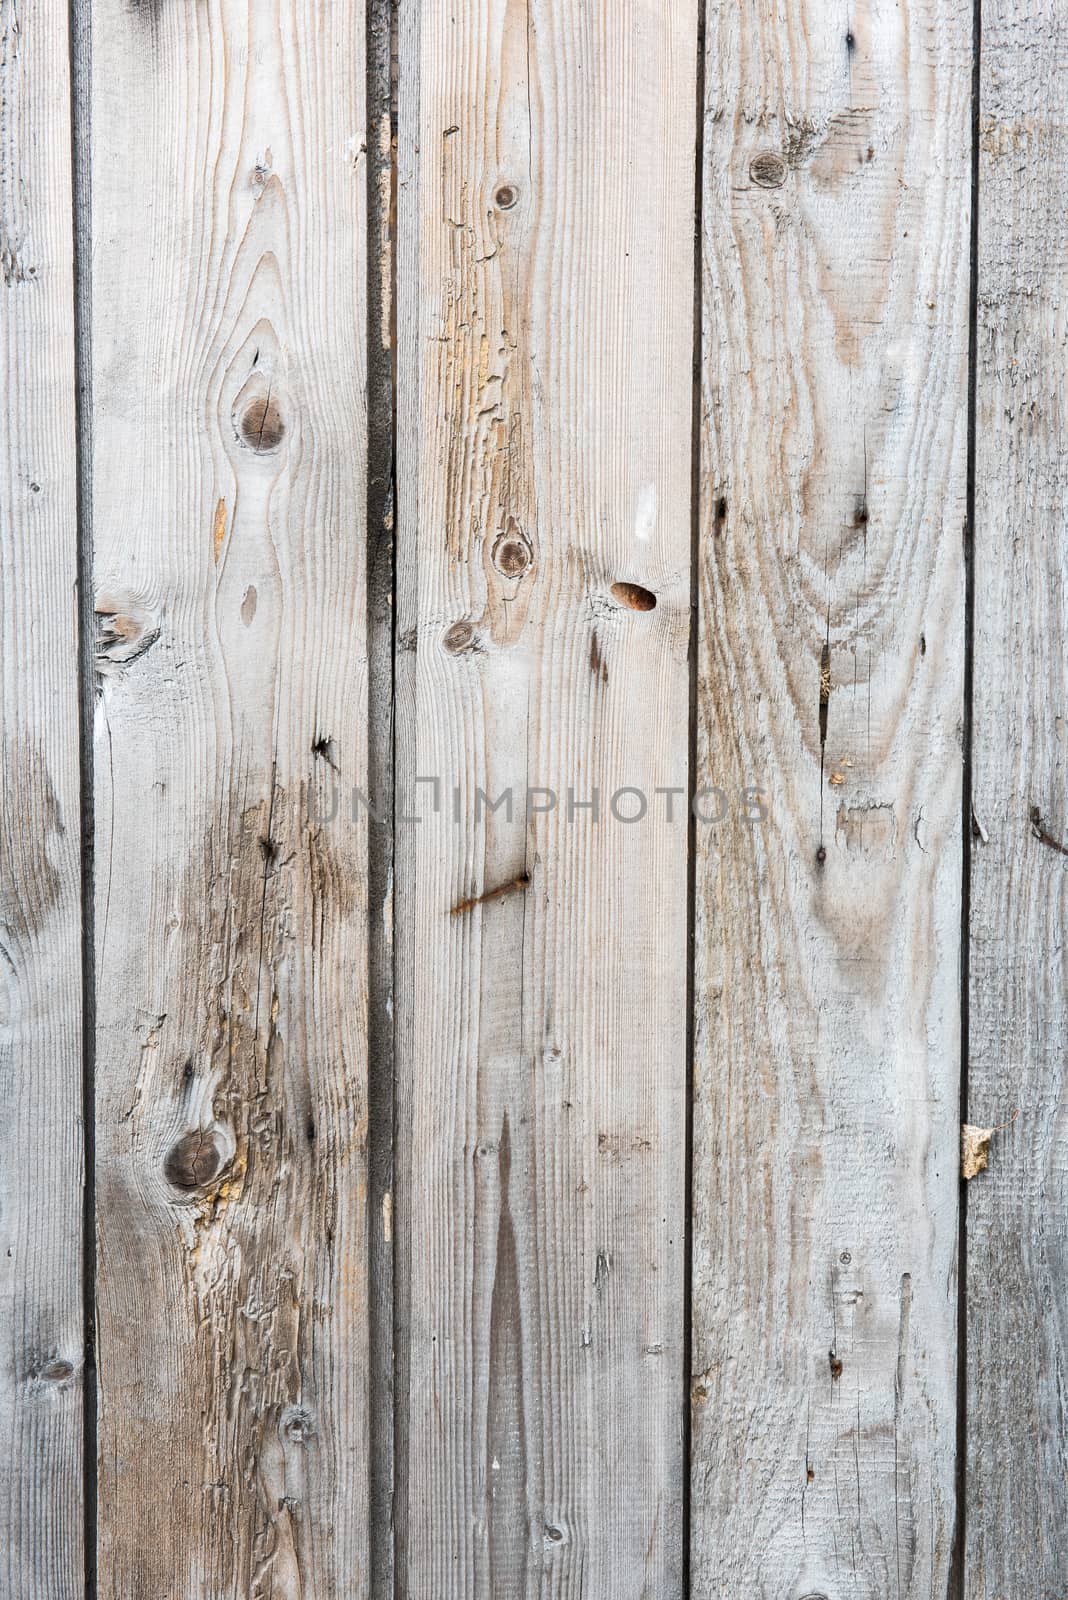 Old wooden wallbackground. Wooden table or floor.